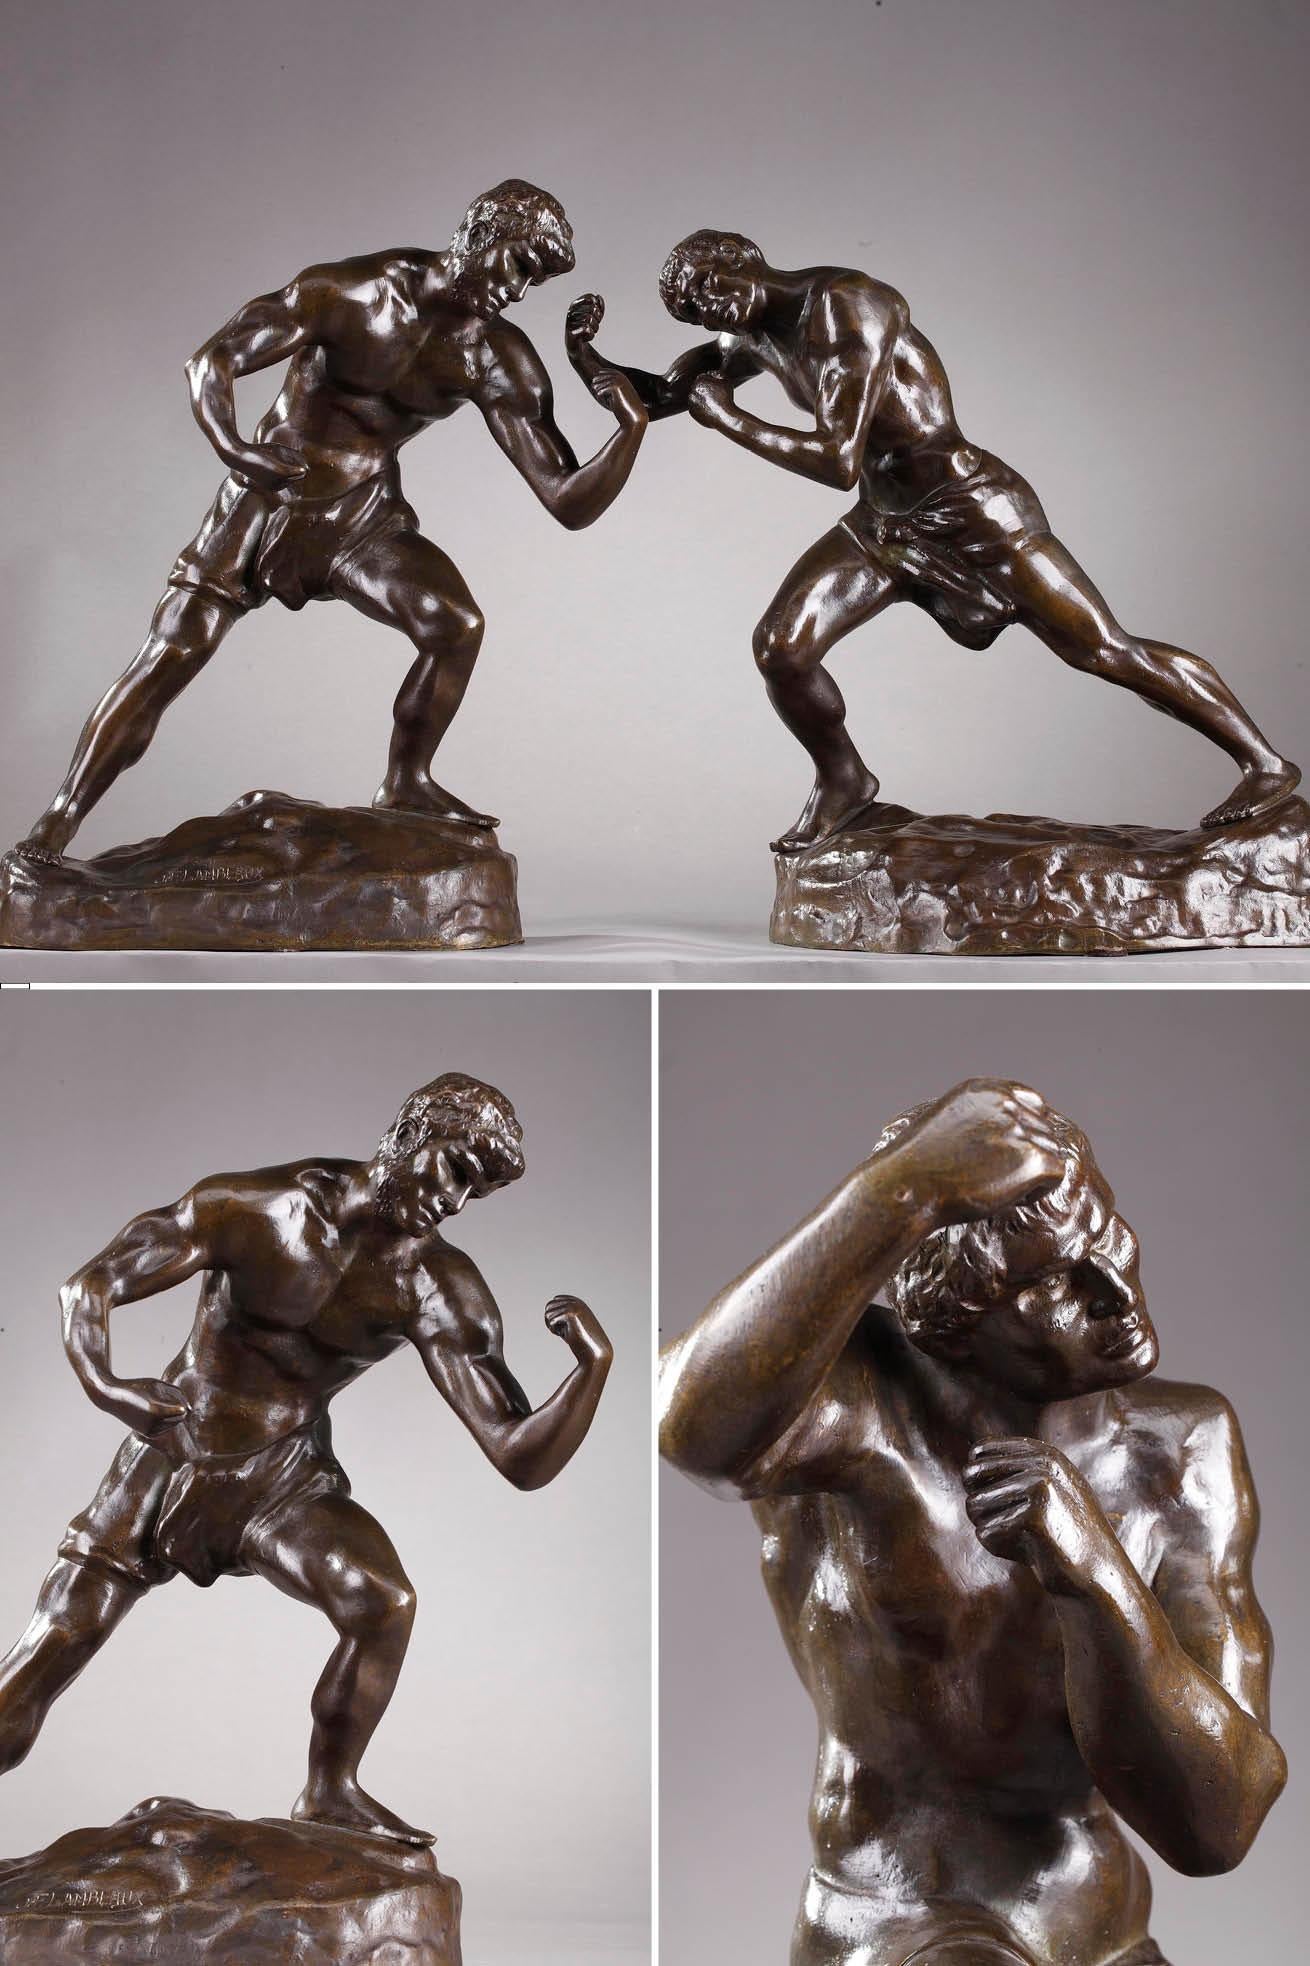 Pair of bronze statuettes with brown patina representing two boxers in full combat, made by Jef Lambeaux (1852-1908). The artist admirably captures the moment and the dynamism, as well as the concentration of the athletes. These statuettes are